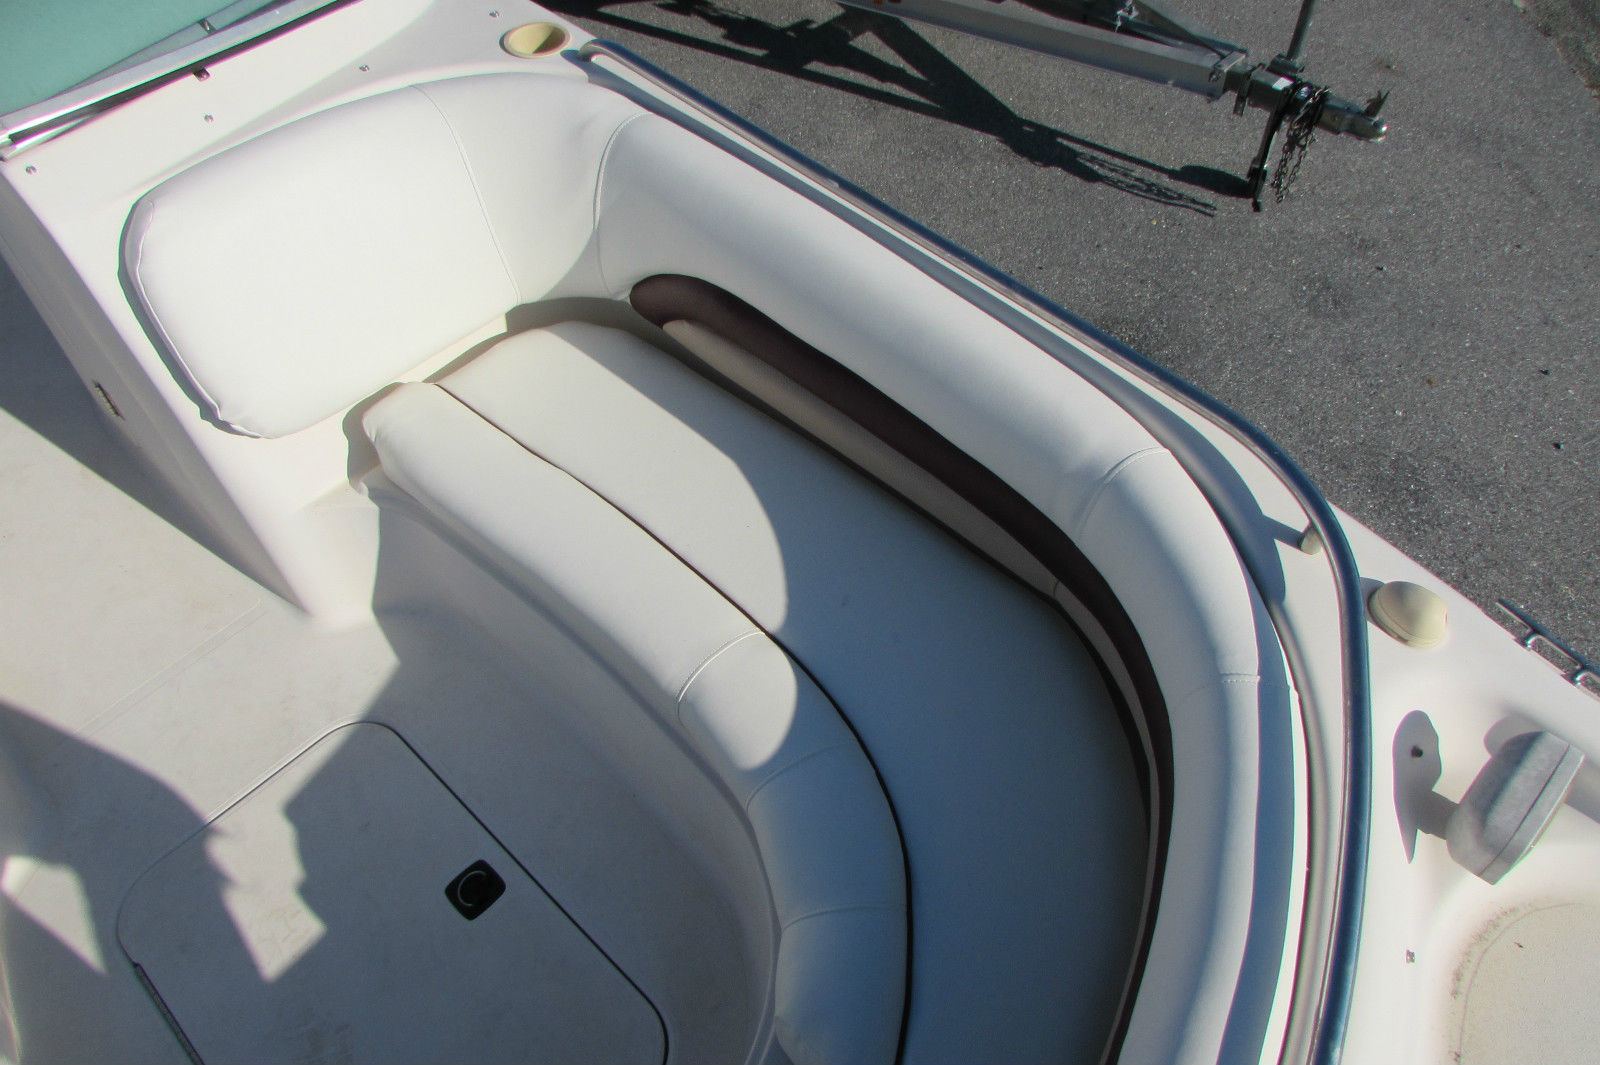 hurricane fun deck 237 1999 for sale for $9,500 - boats